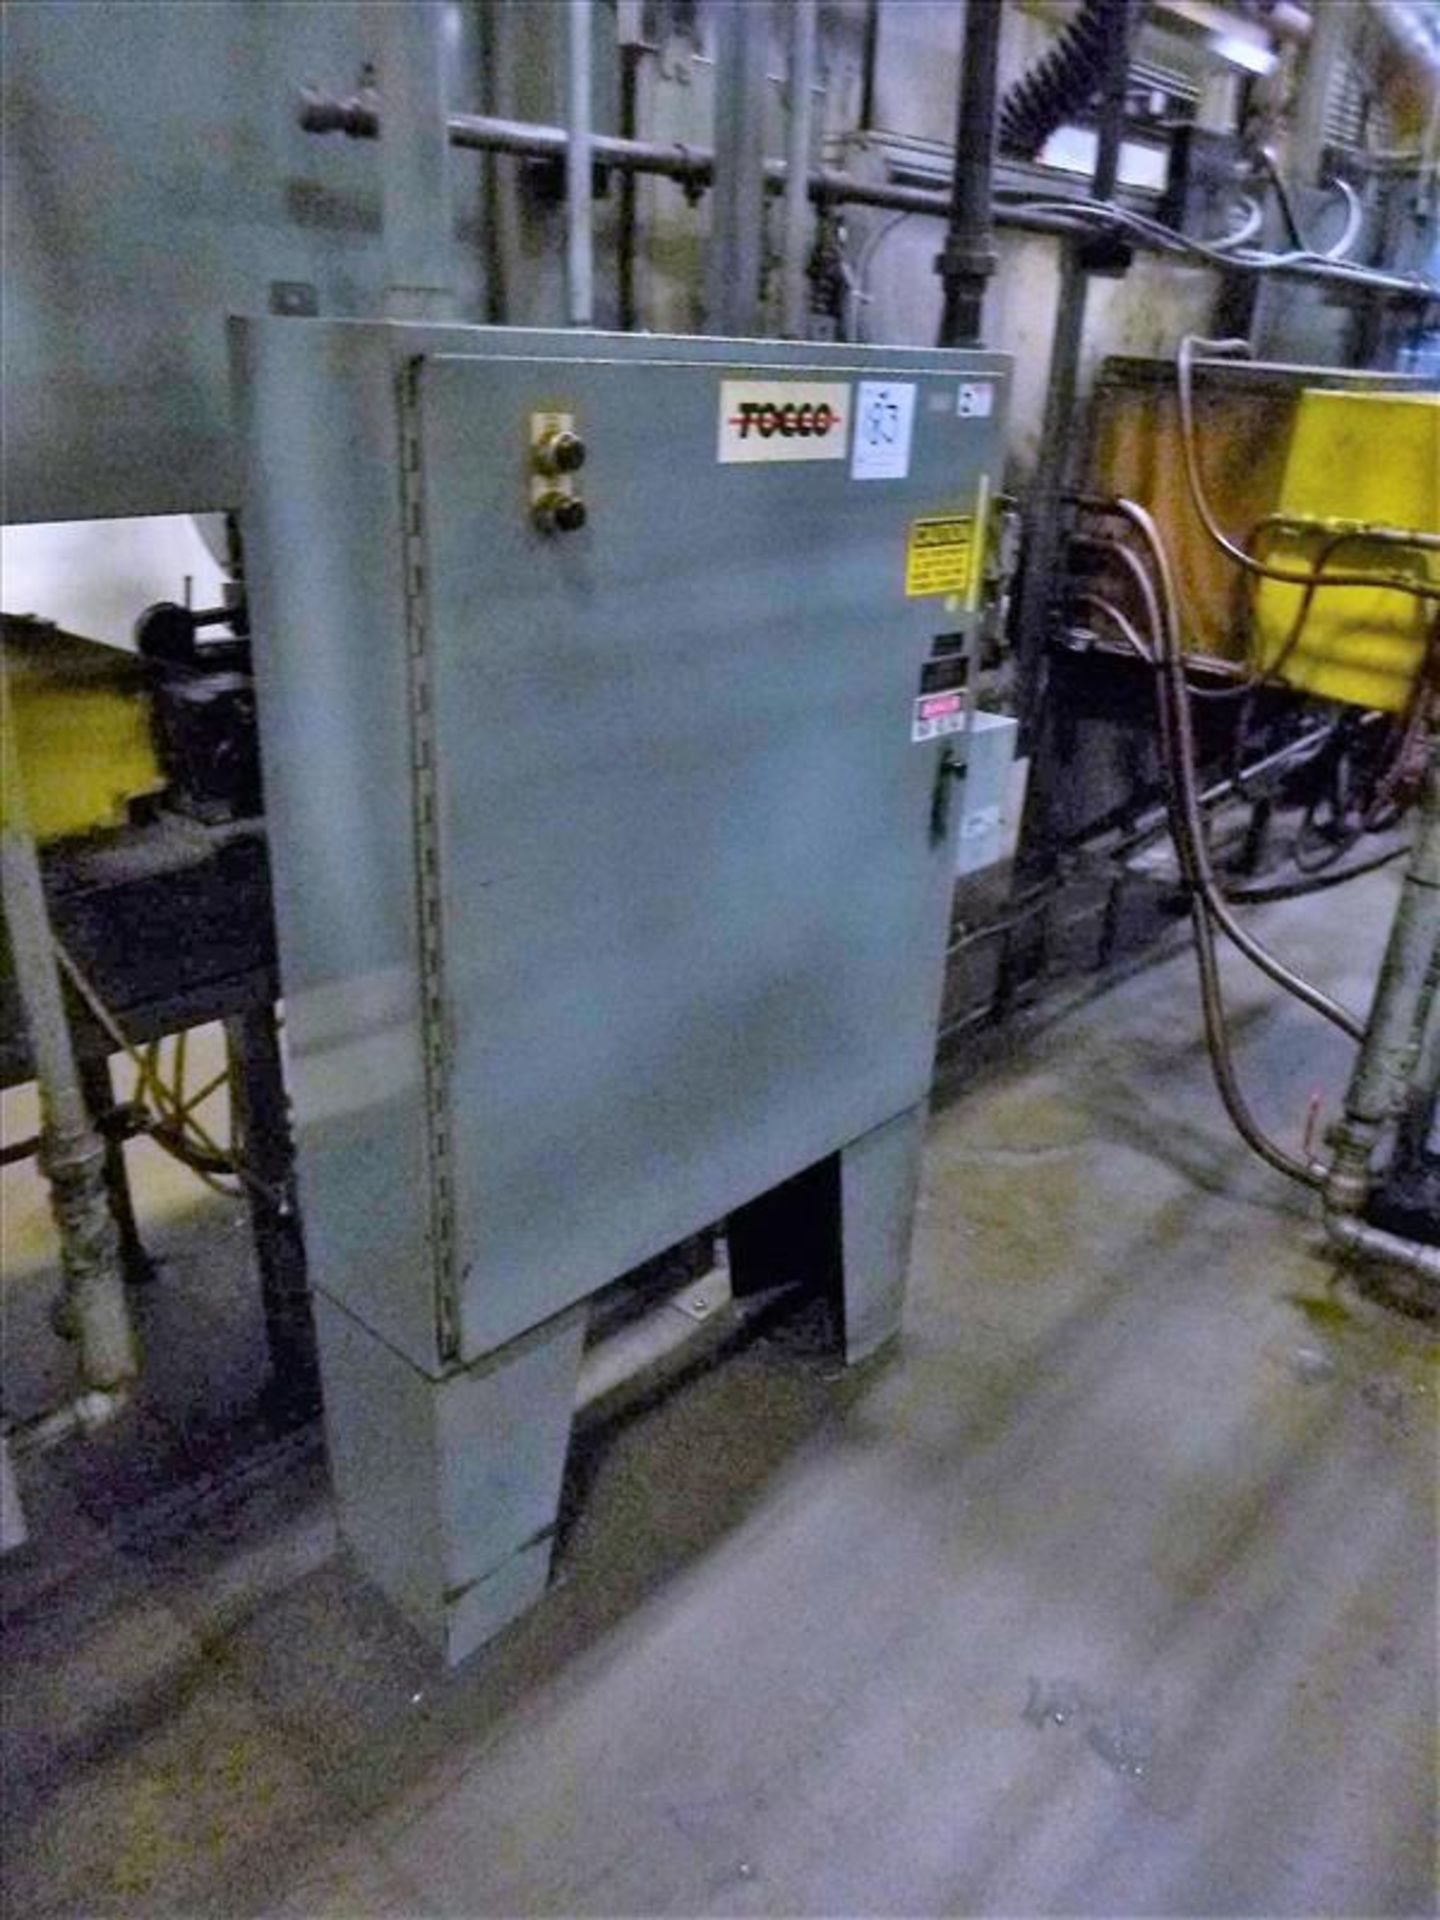 TOCCO Hardener Unit w/ TOCCOTRON 5EA 150 kw RF Generator, s/n 12-8313-16 c/w Distilled Water, - Image 15 of 23